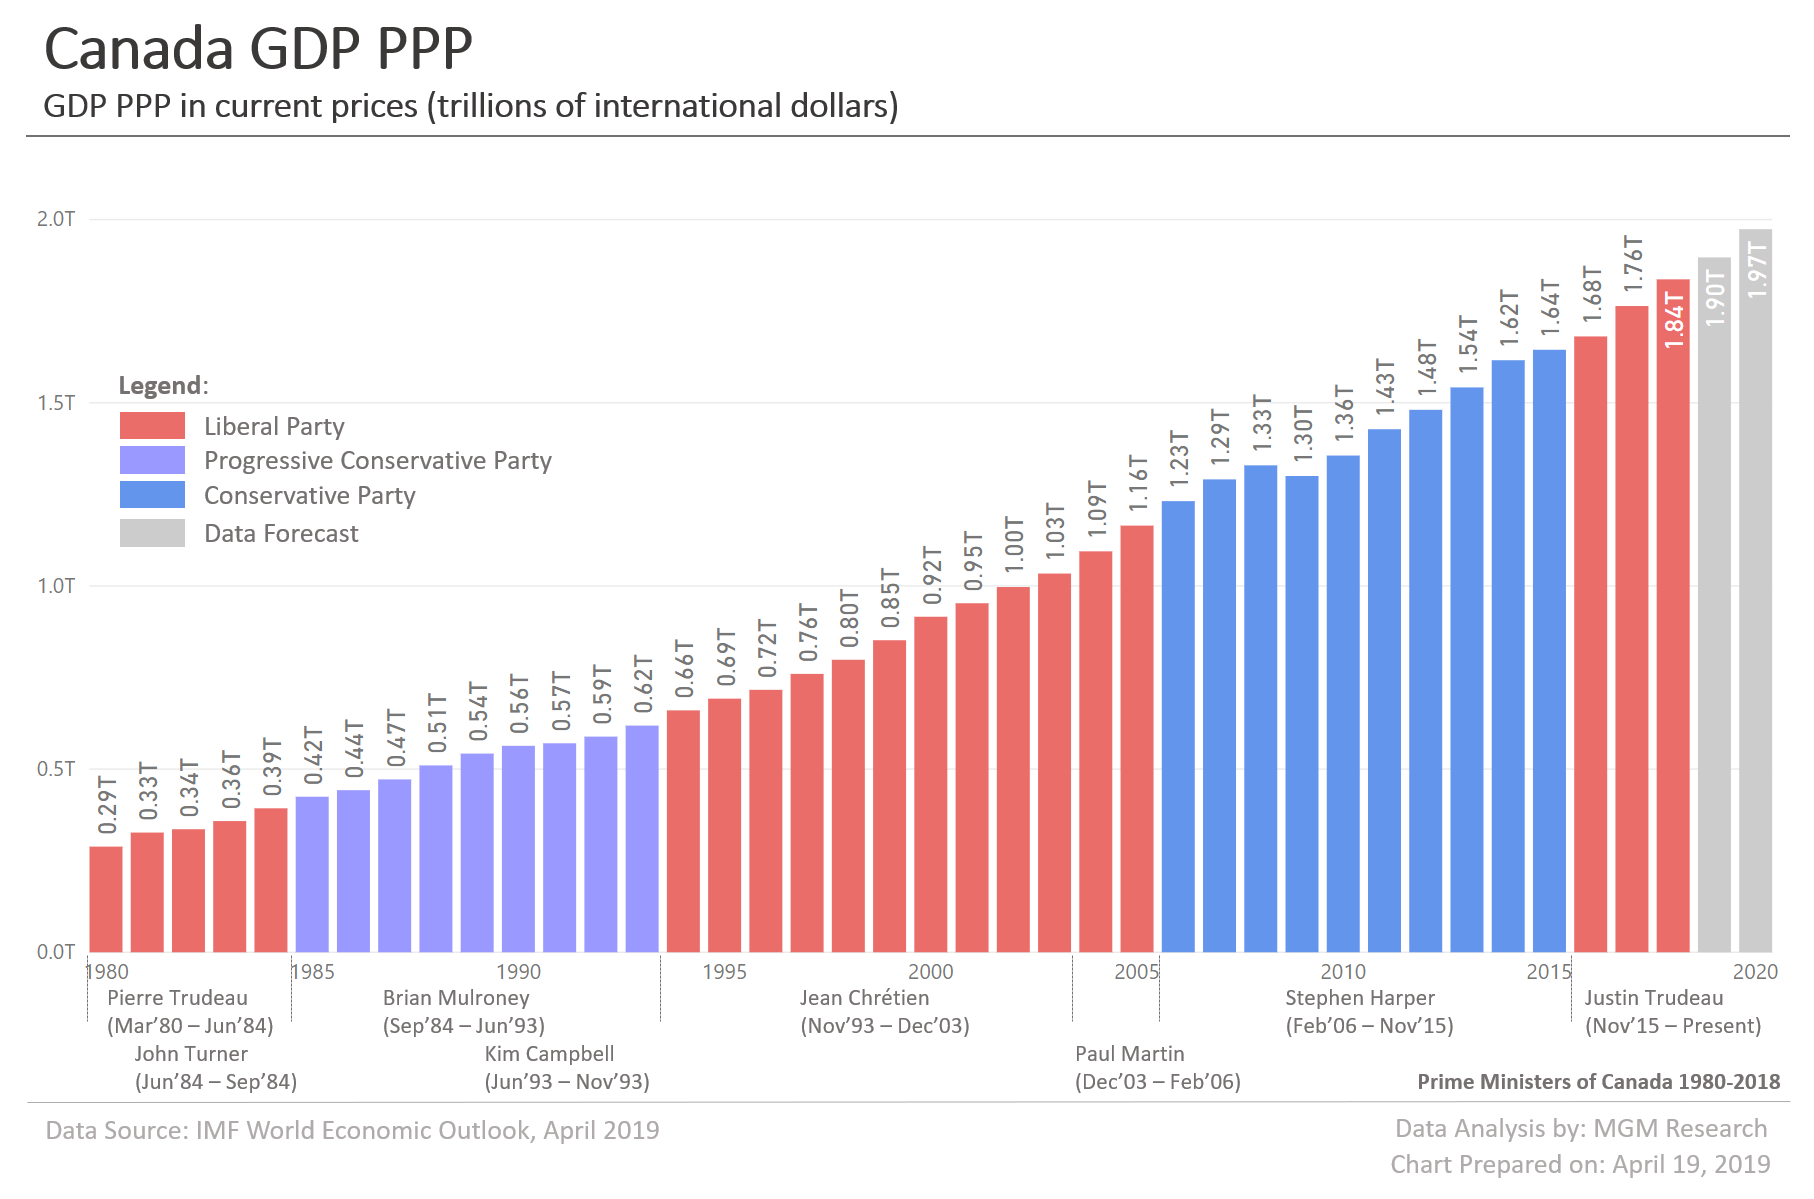 Canada GDP PPP 1980-2020